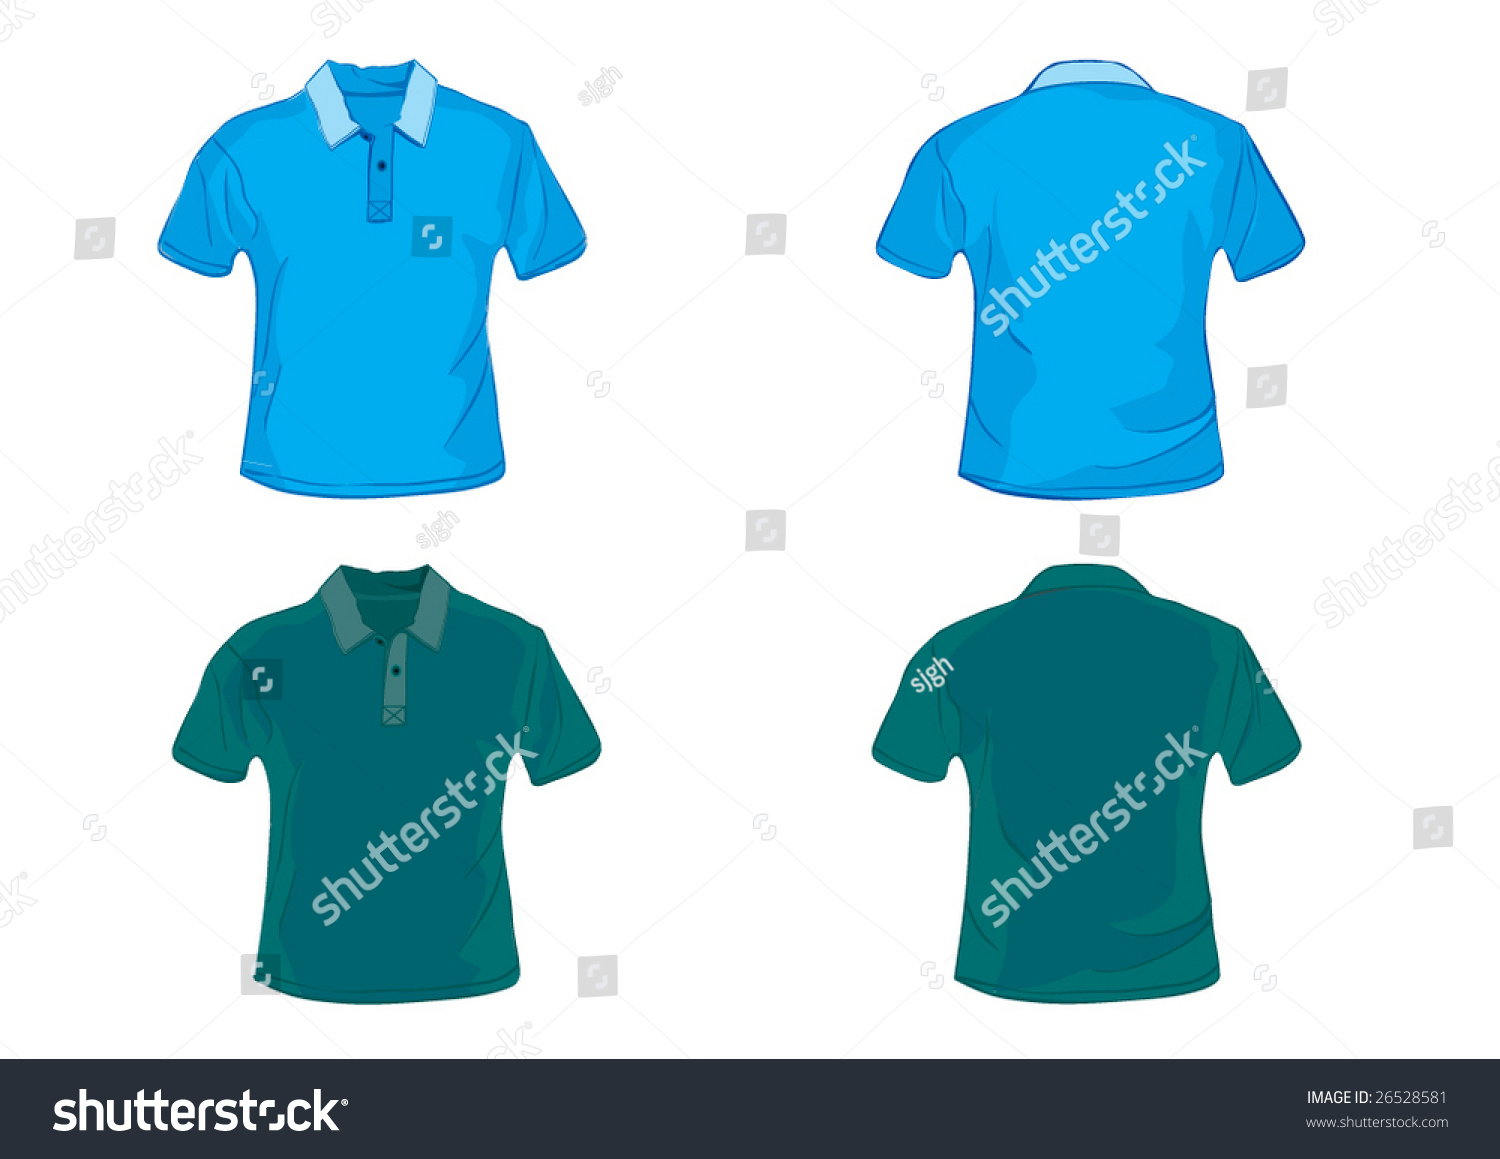 Blue And Green Polo Shirt Design Template With Front And Back. Stock ...